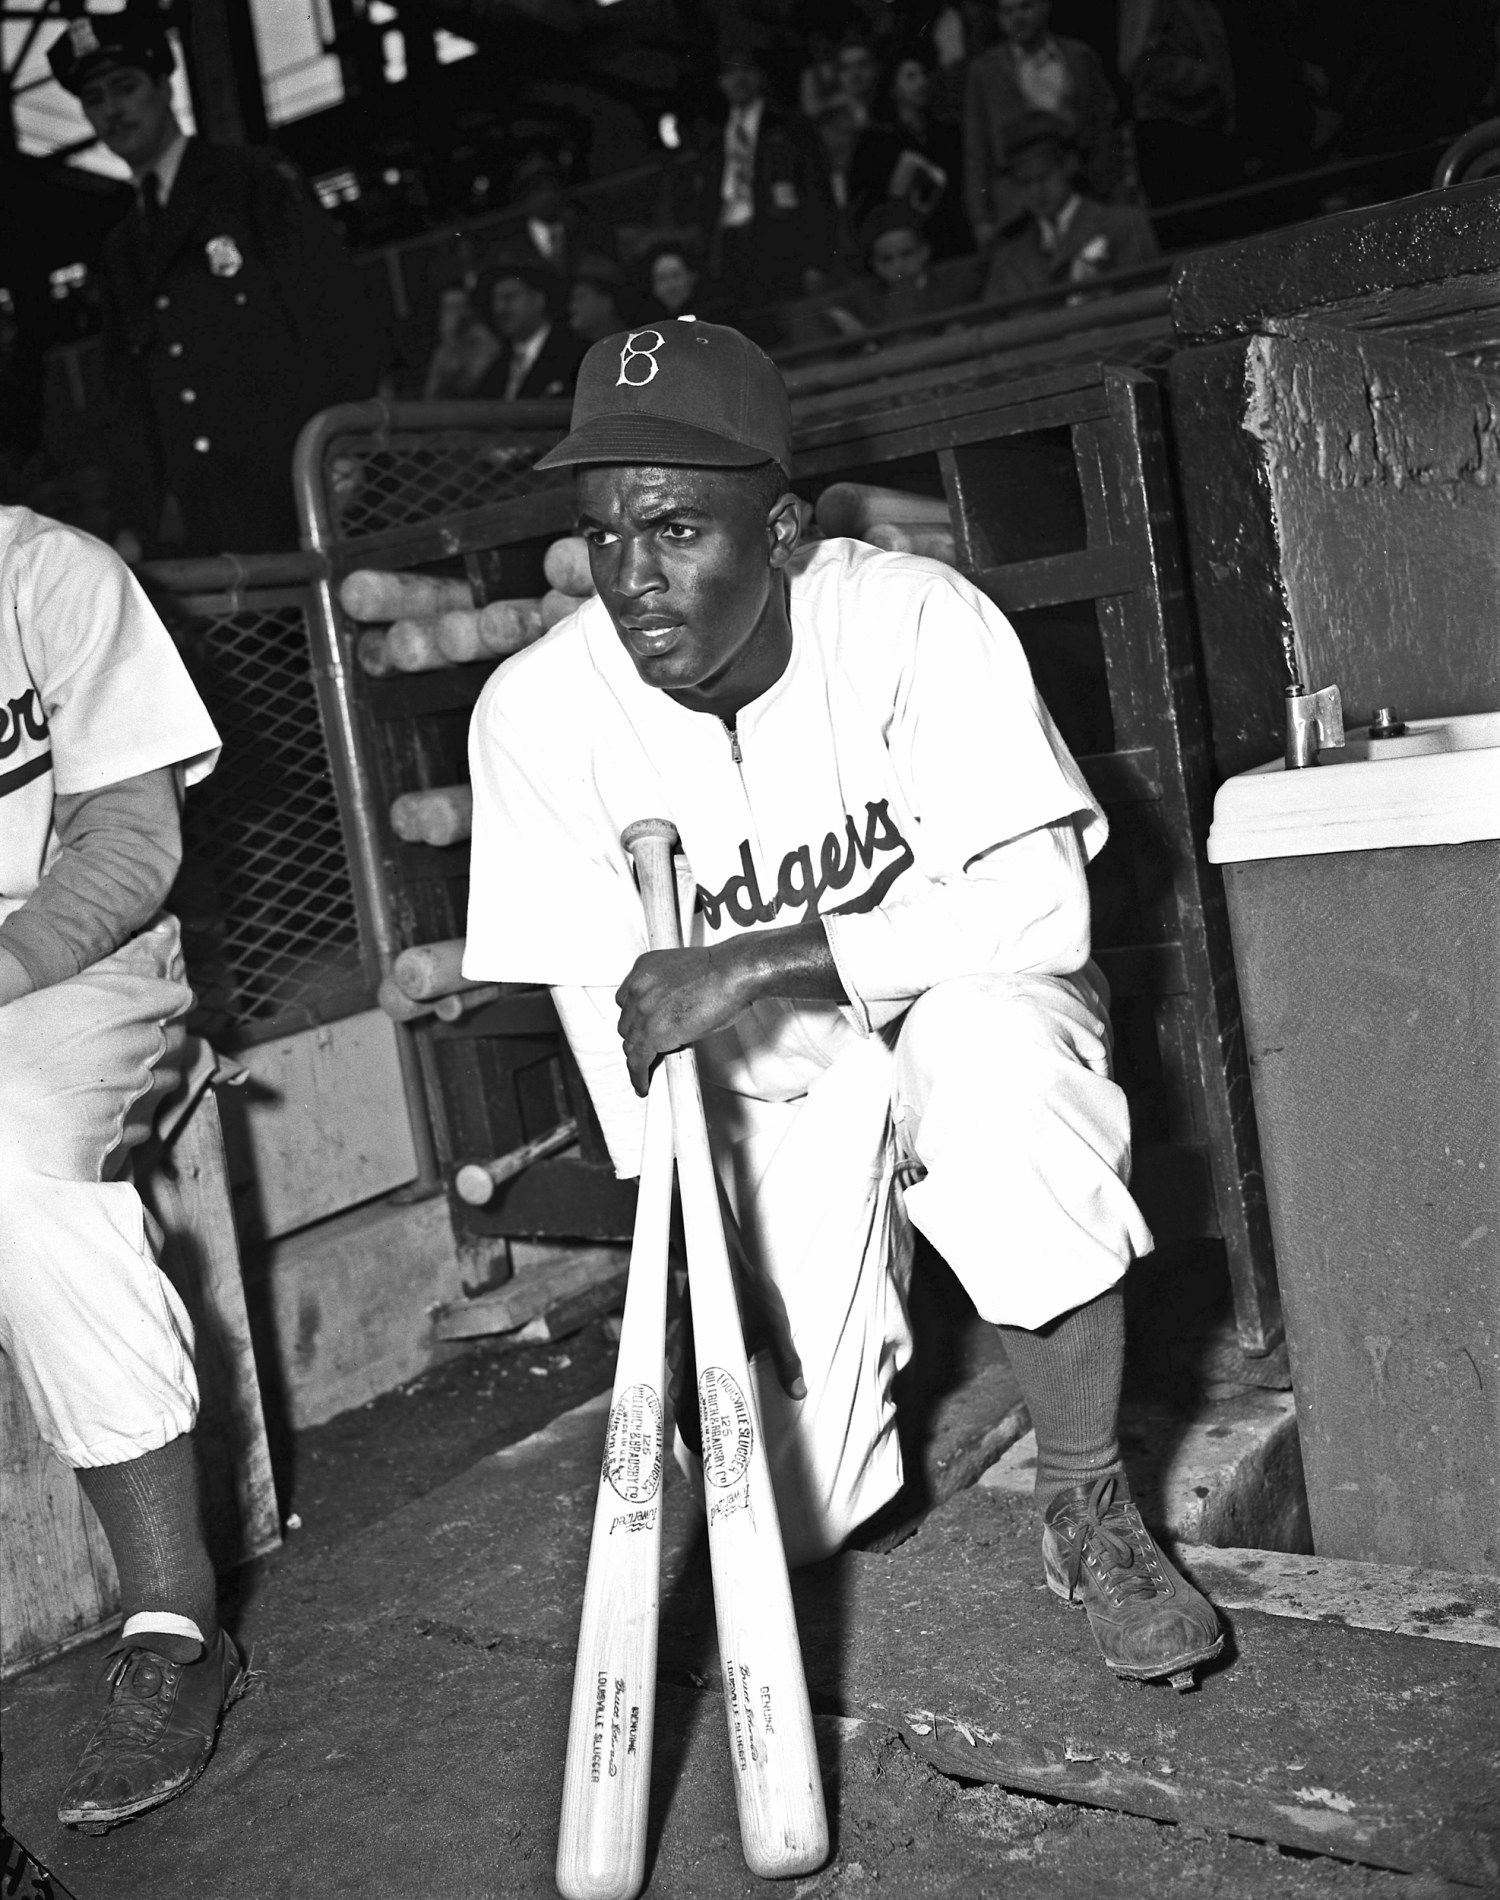 Baseball honors Jackie Robinson Day 75 years after he broke the color  barrier